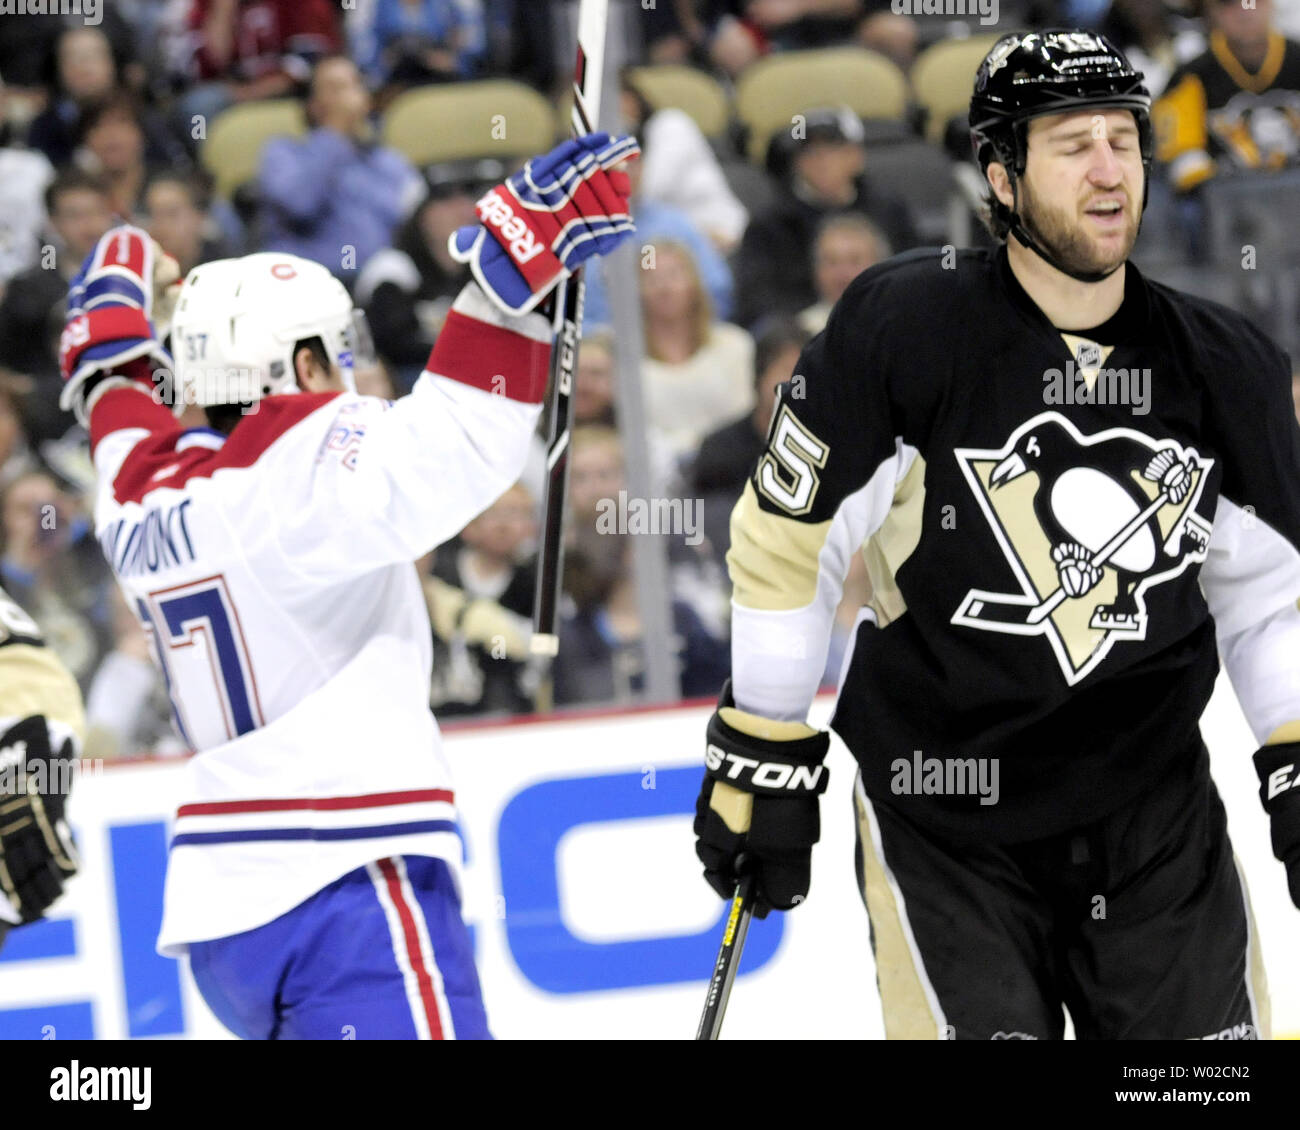 pittsburgh-penguins-center-tanner-glass-15-react-to-montreal-canadiens-center-gabriel-dumont-37-goal-in-the-third-period-of-the-penguins-6-4-win-over-the-canadiens-at-the-consol-energy-center-in-pittsburgh-on-april-17-2013-upiarchie-carpenter-W02CN2.jpg